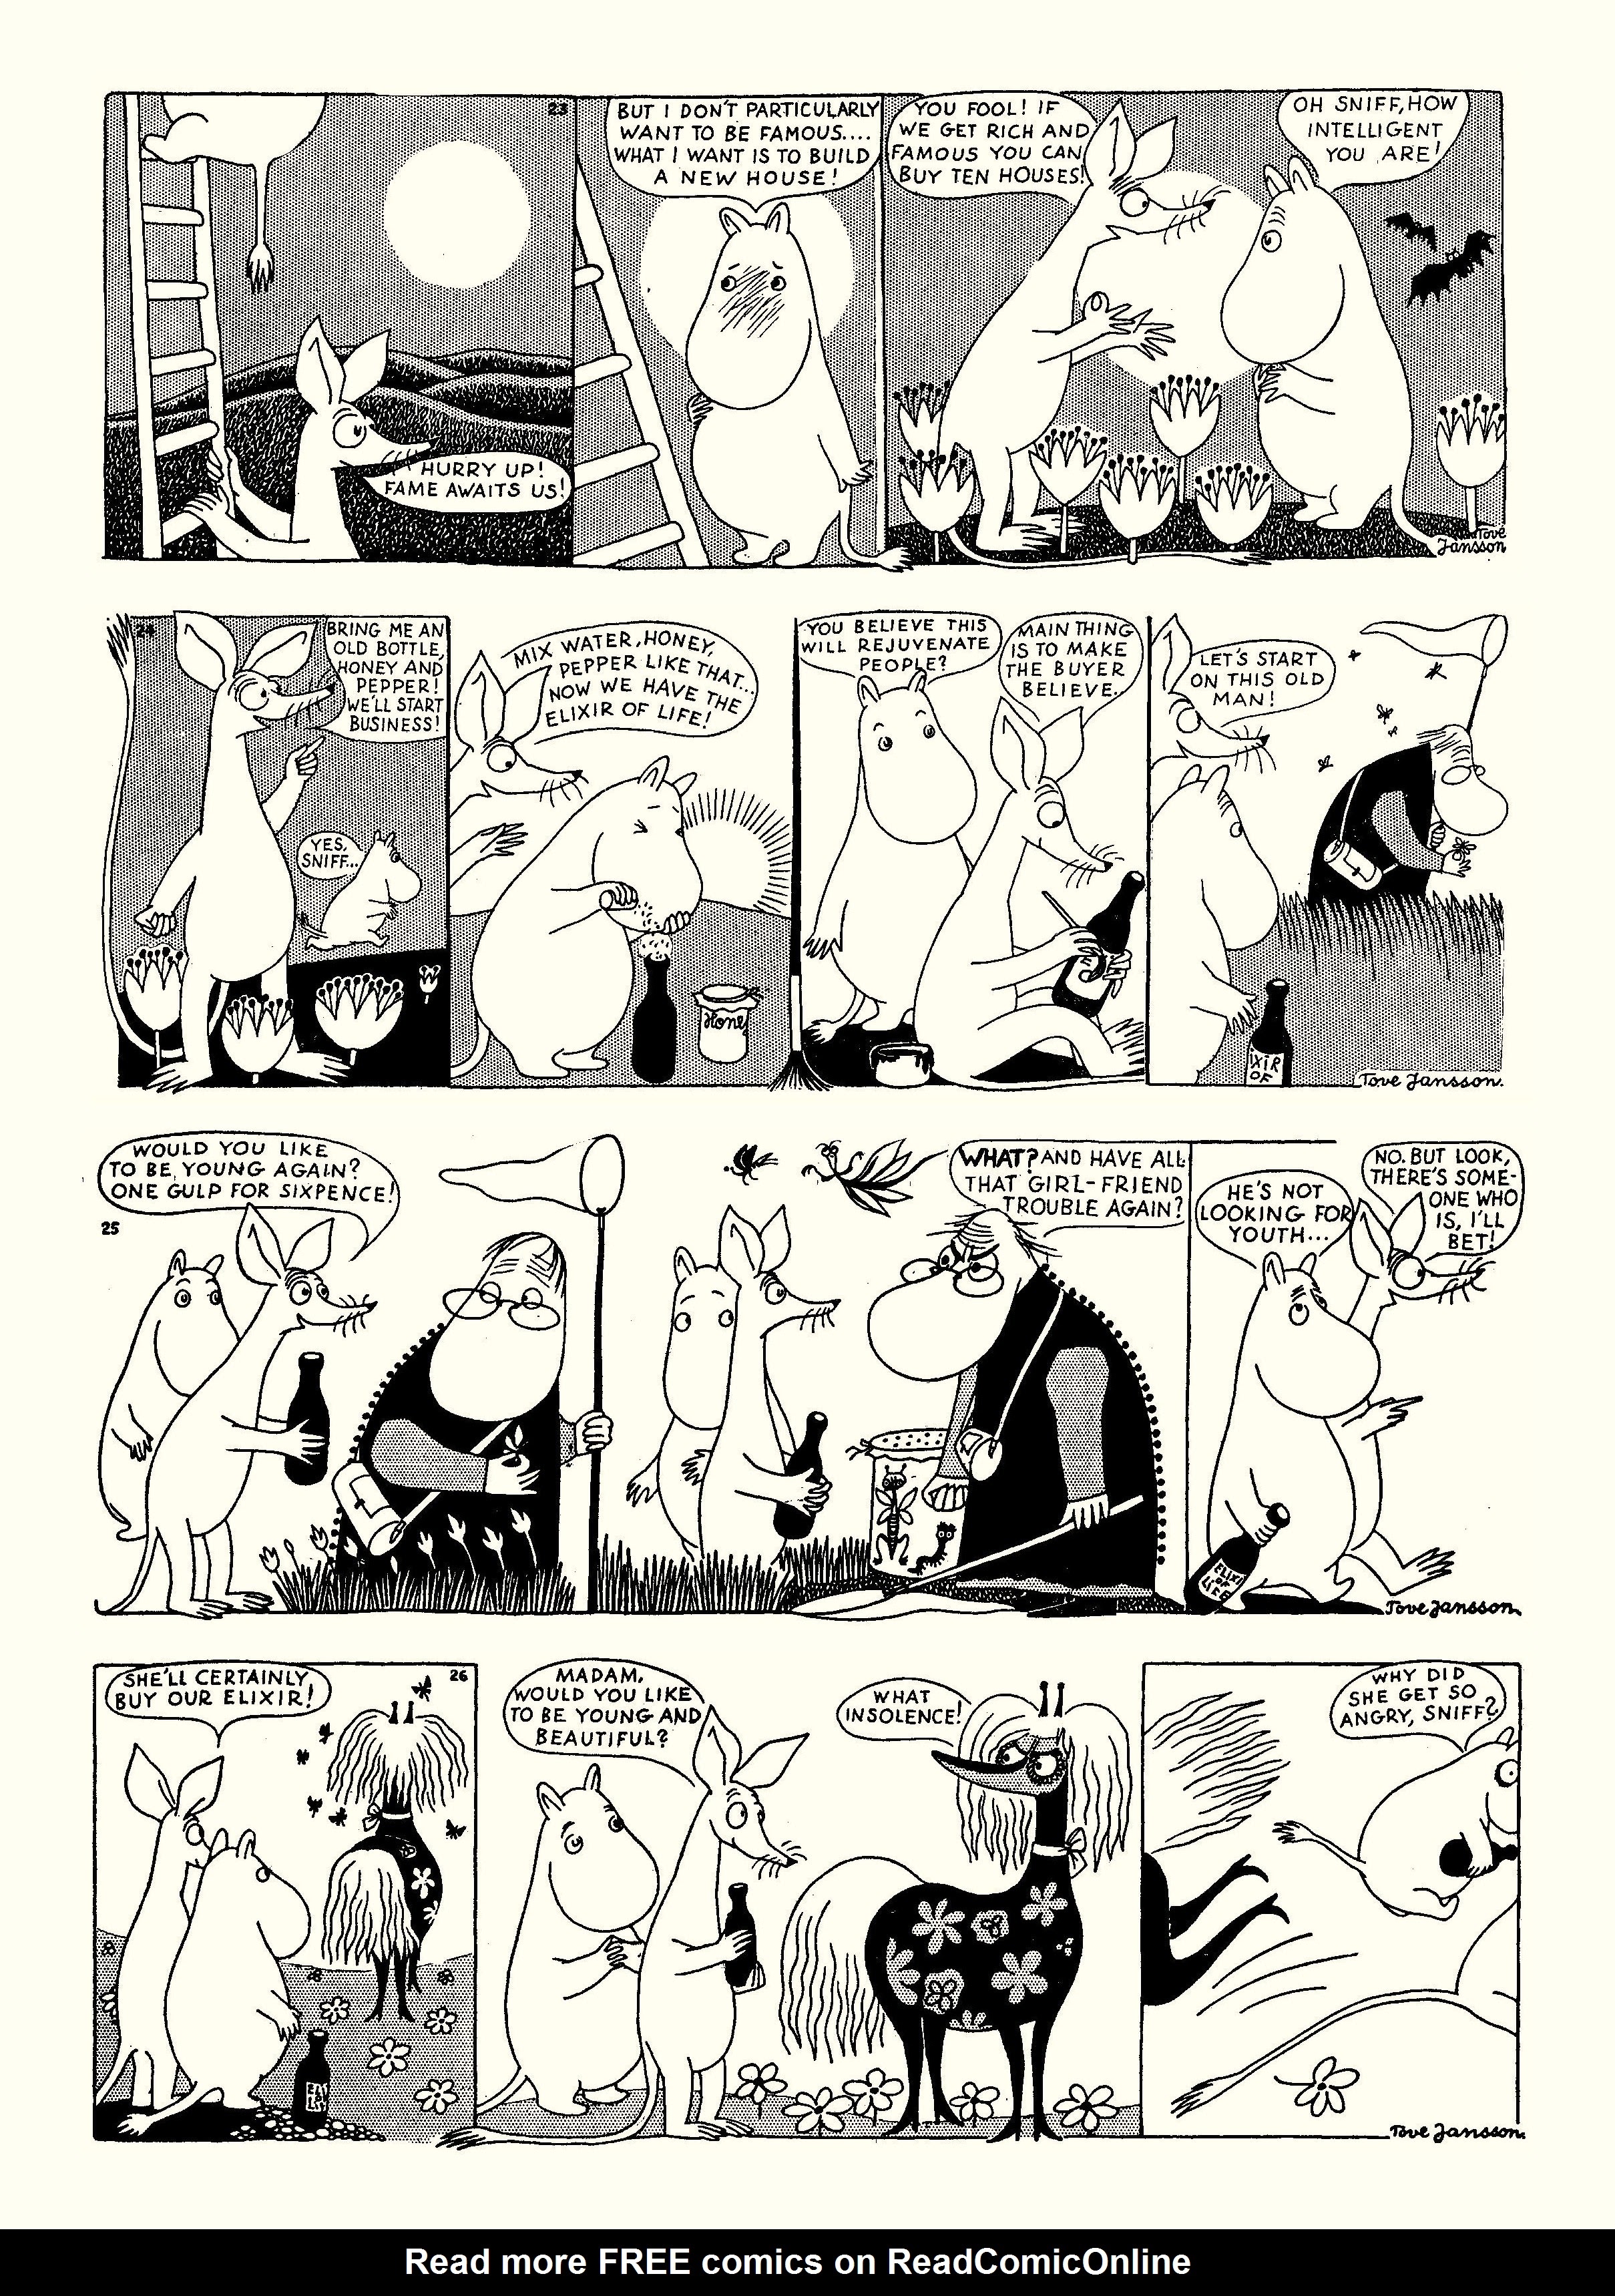 Read online Moomin: The Complete Tove Jansson Comic Strip comic -  Issue # TPB 1 - 12